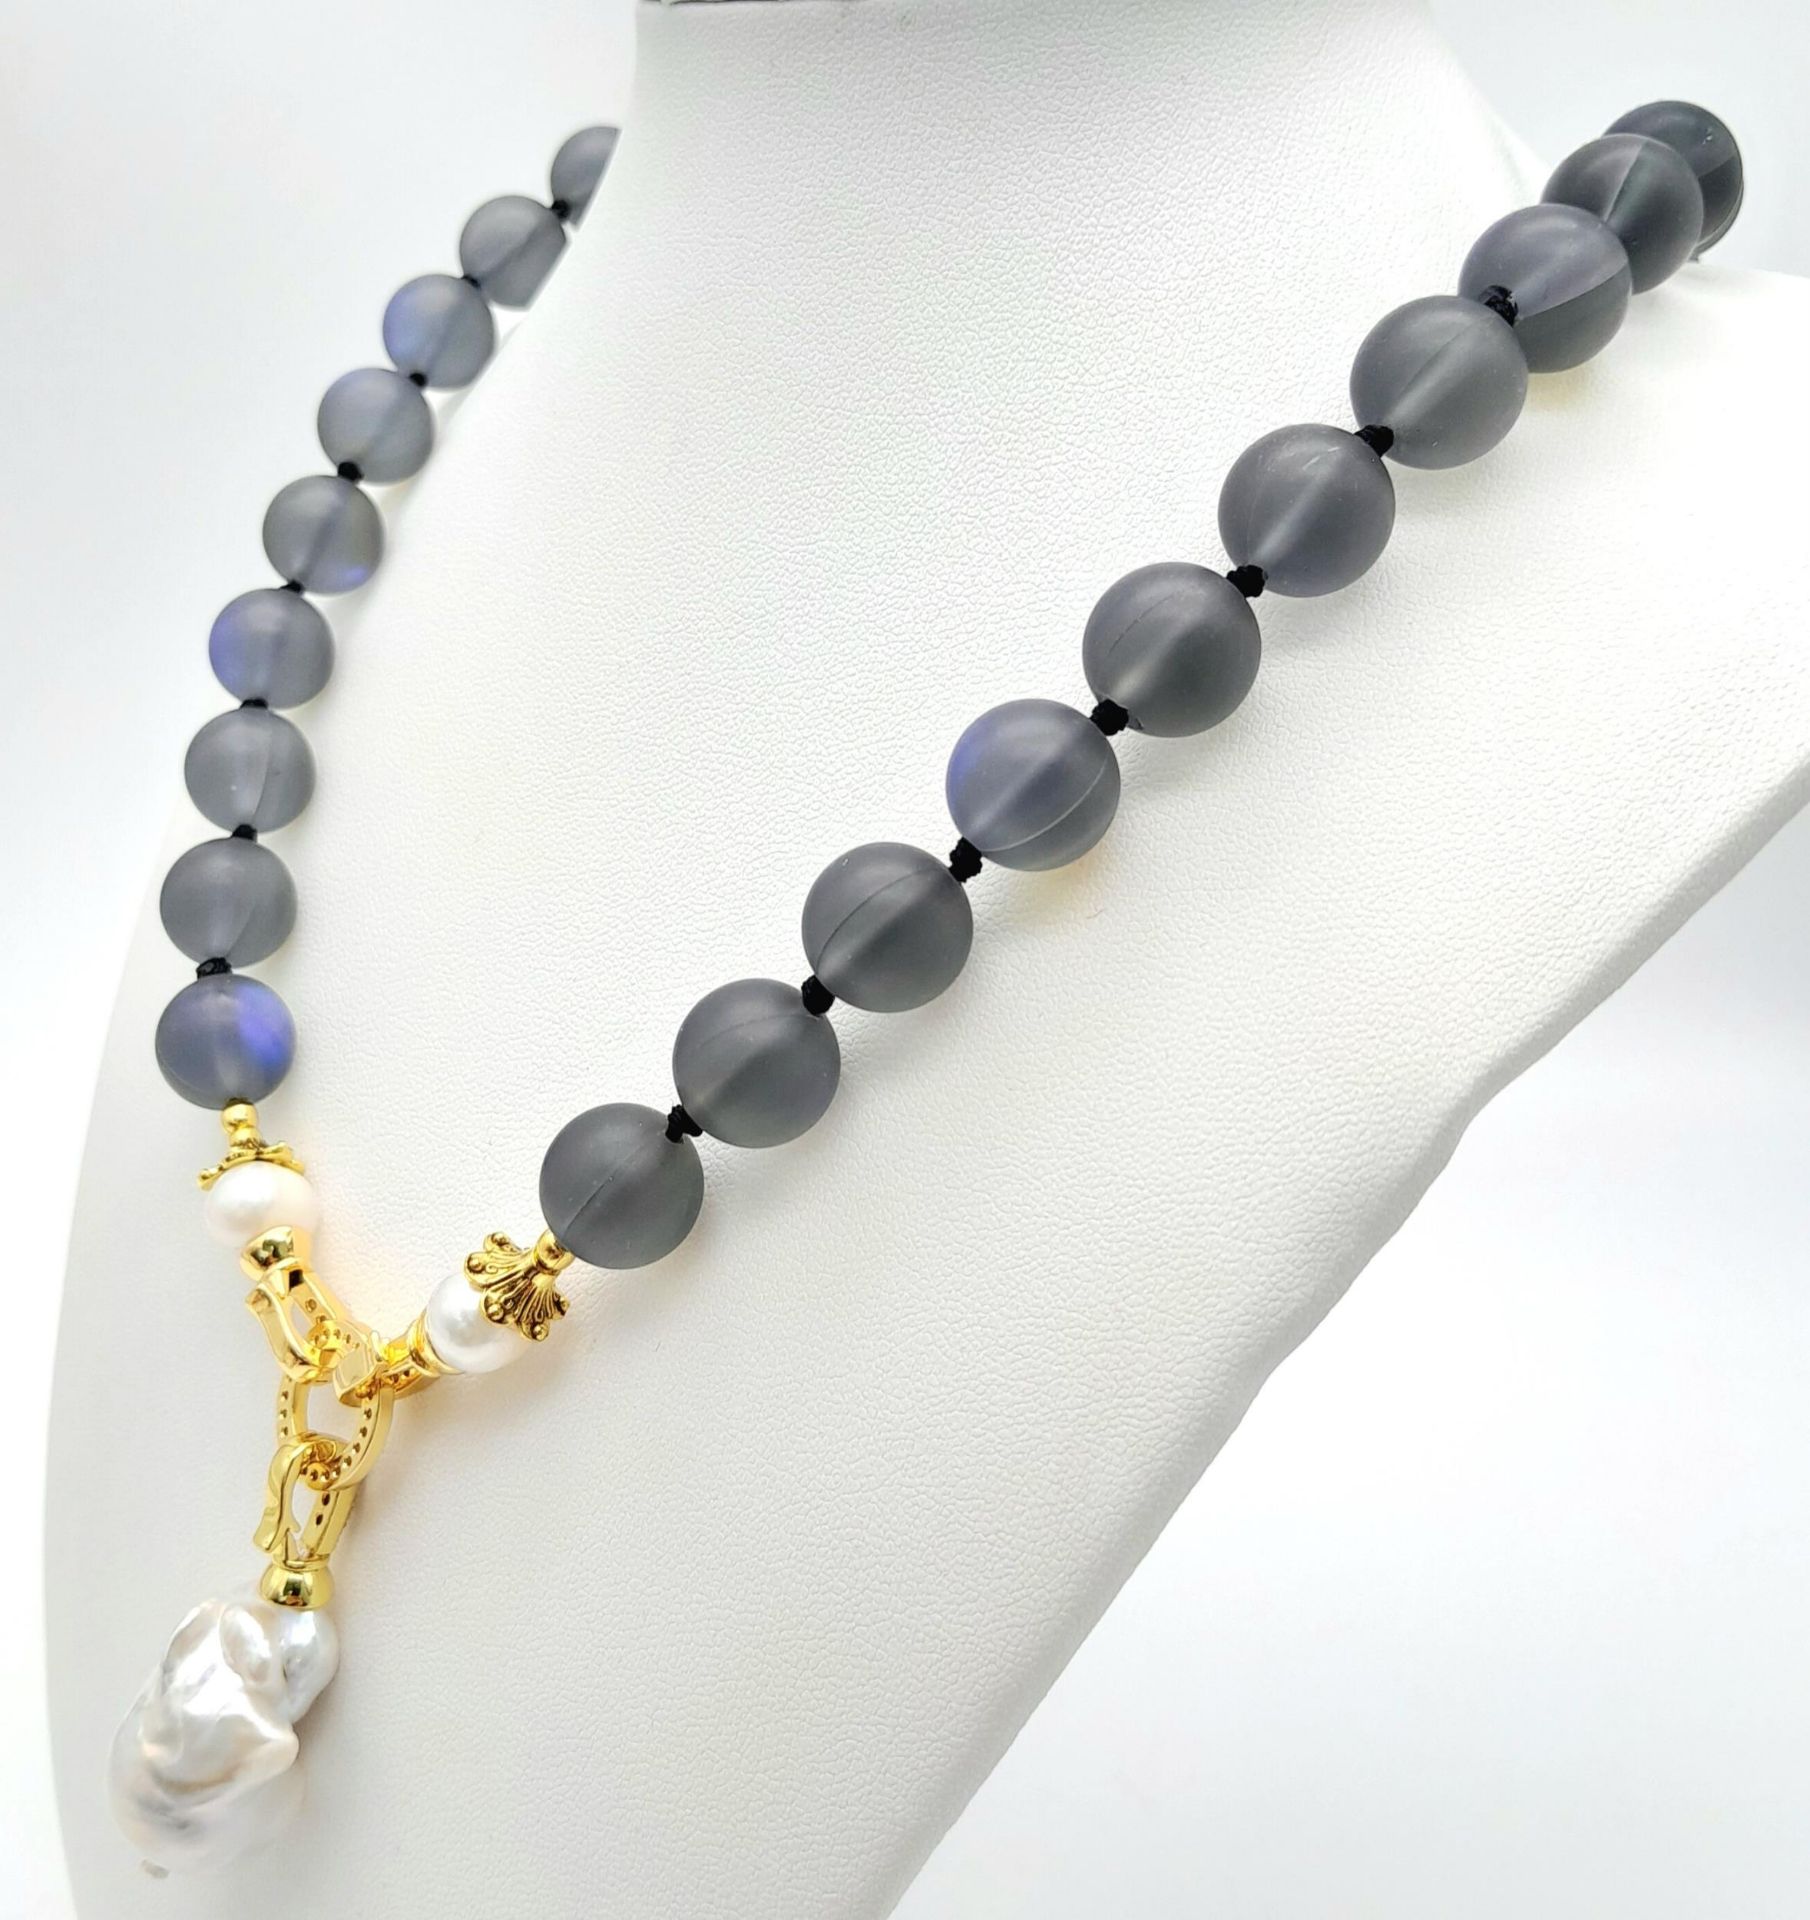 A Hypnotic Grey/Blue Moonstone Beaded Necklace with Baroque Pearl Drop Pendant. 12mm beads. 6cm - Image 3 of 4